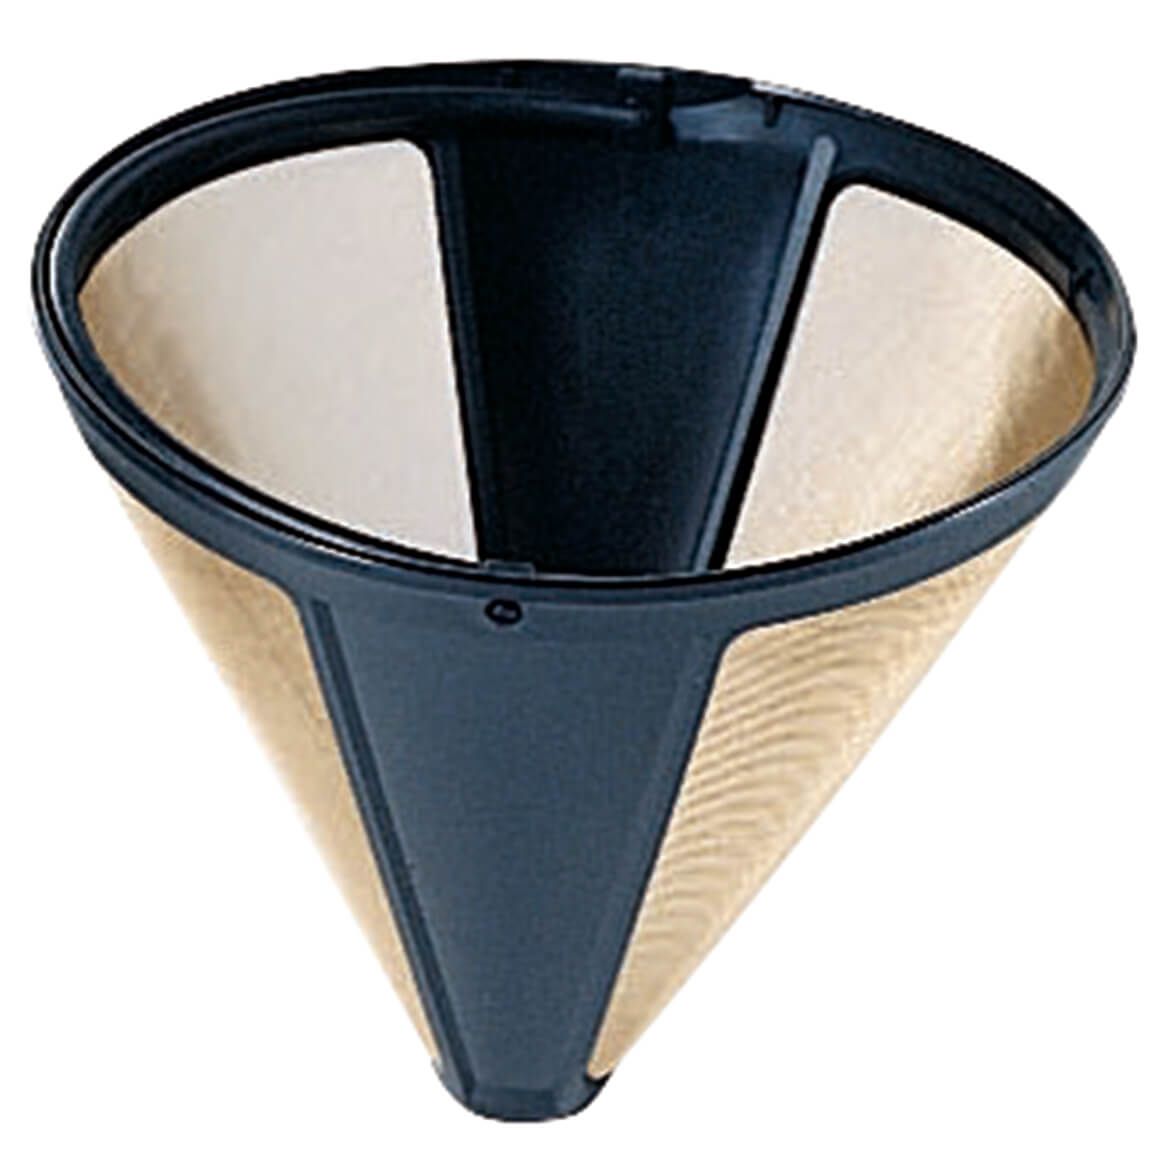 Permanent Gold Tone Coffee Filter + '-' + 303765